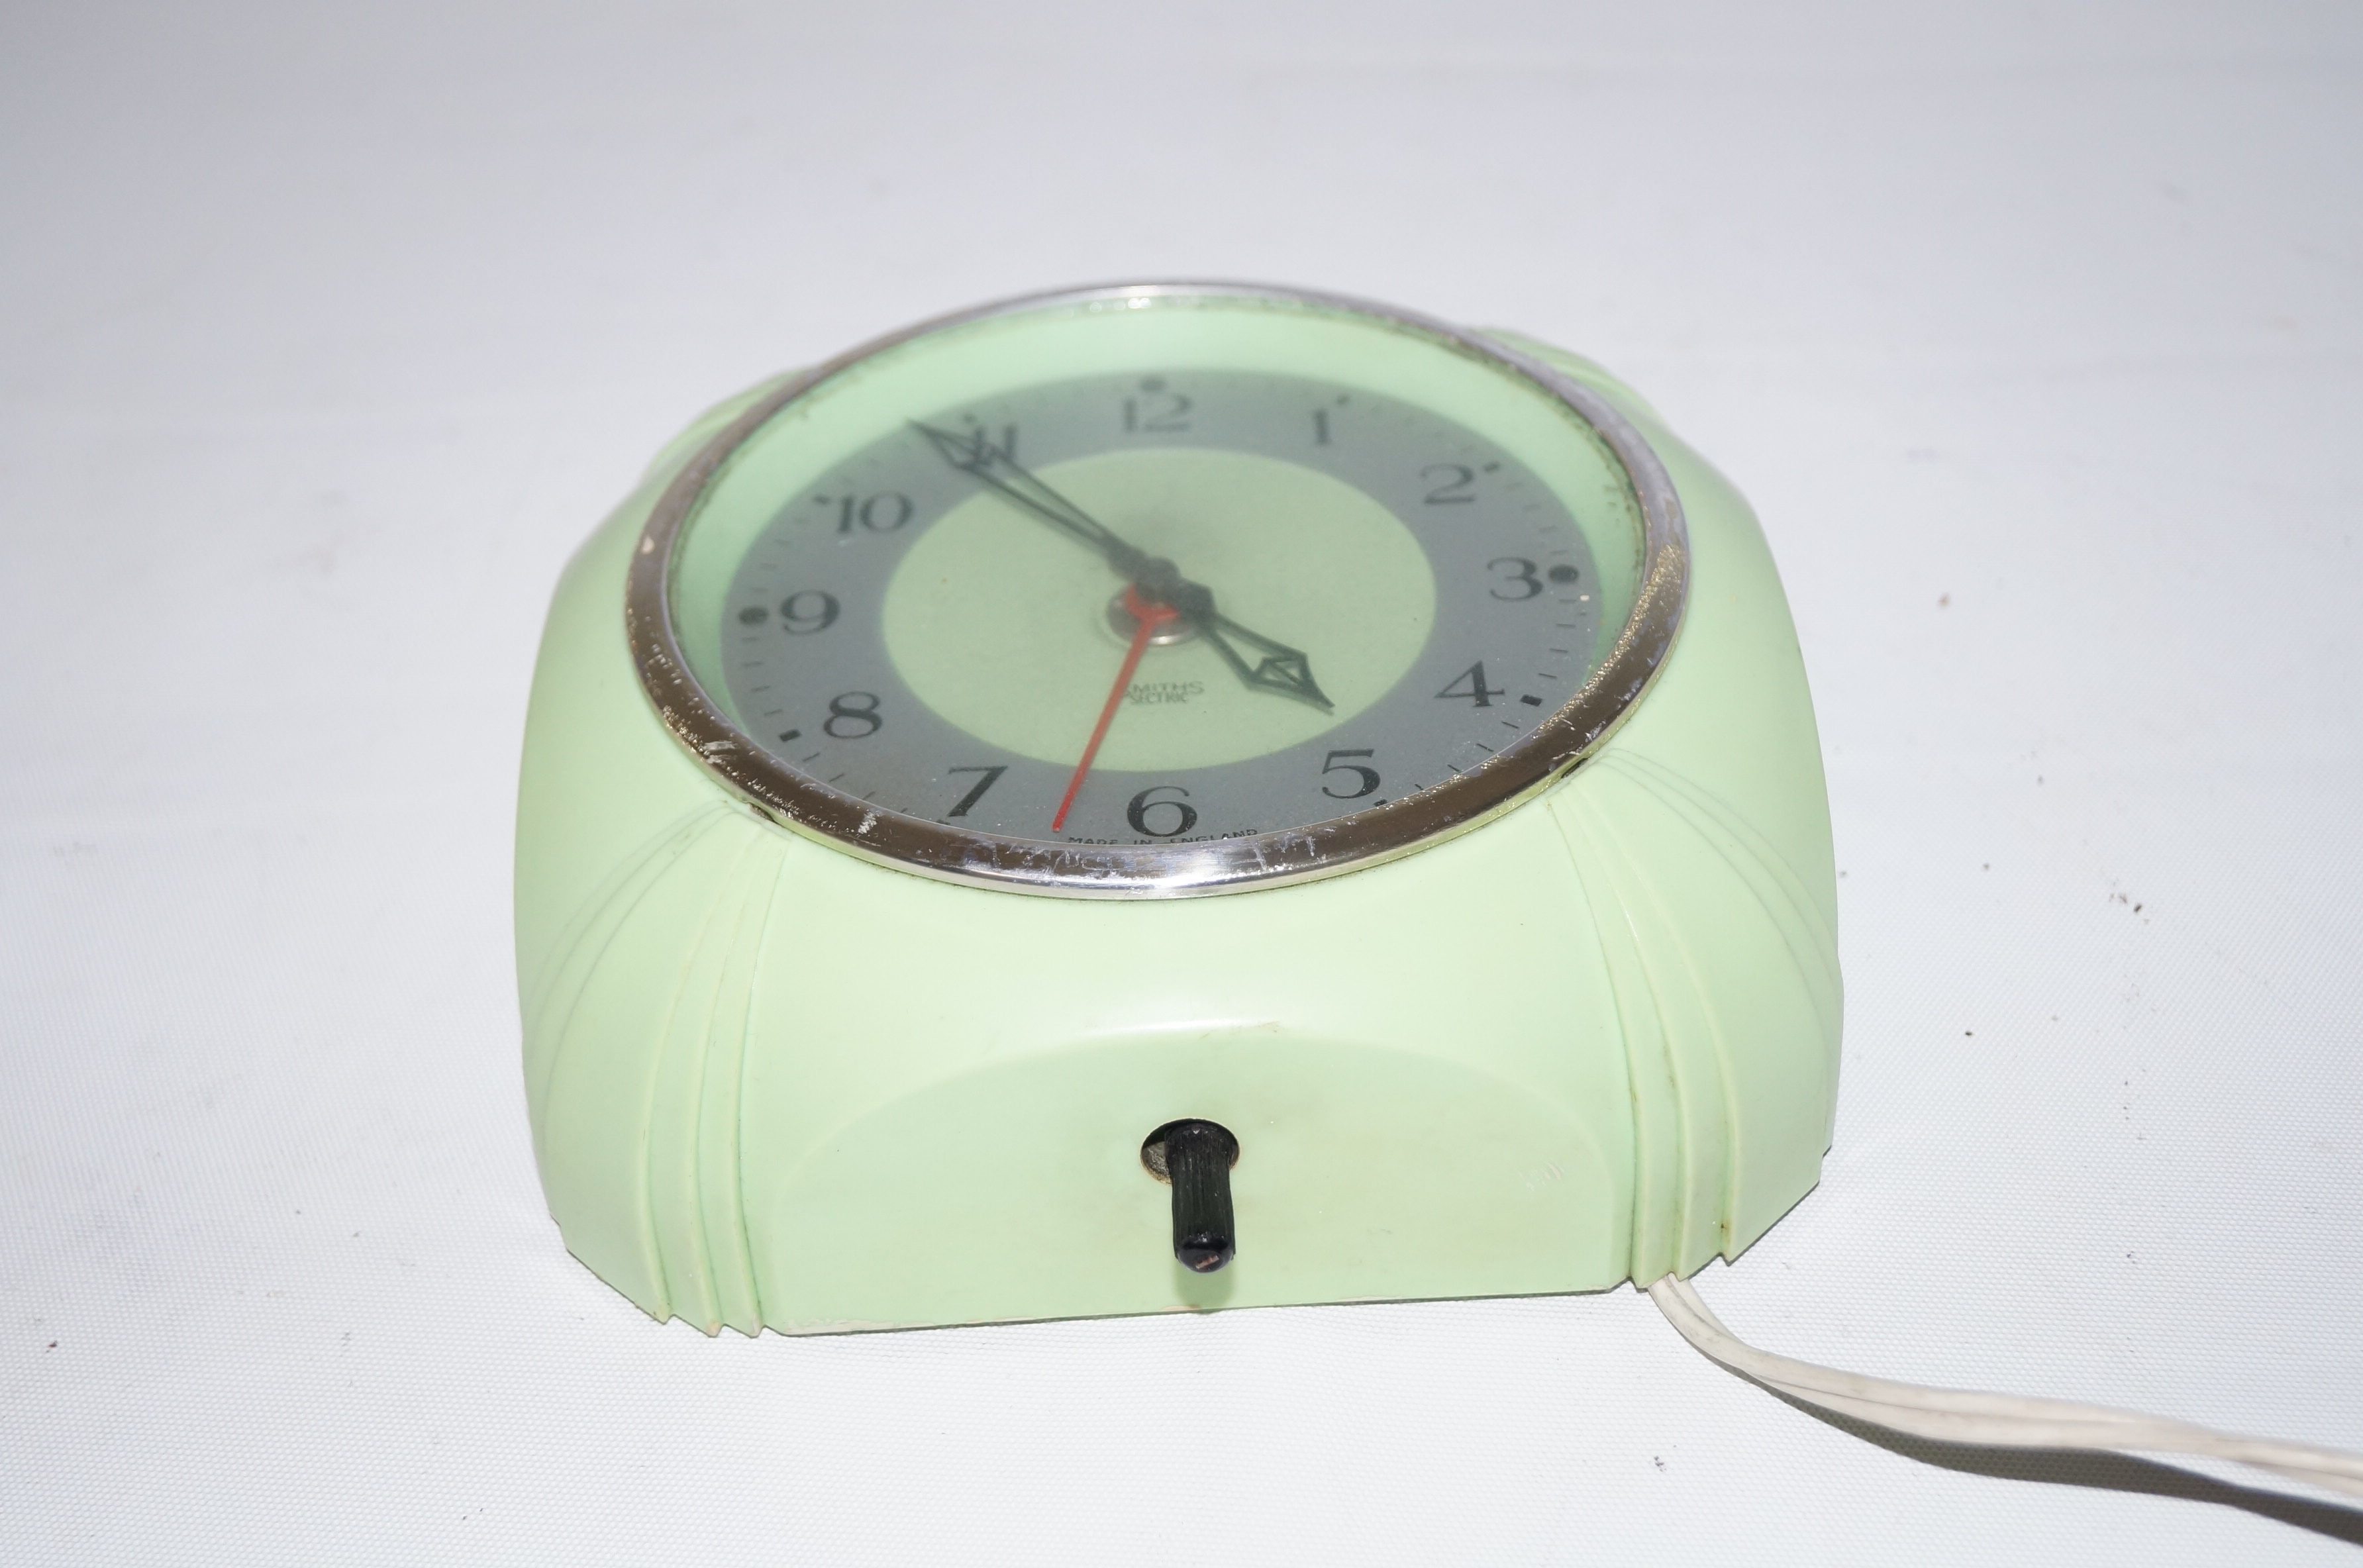 Smiths sectric art deco electric clock